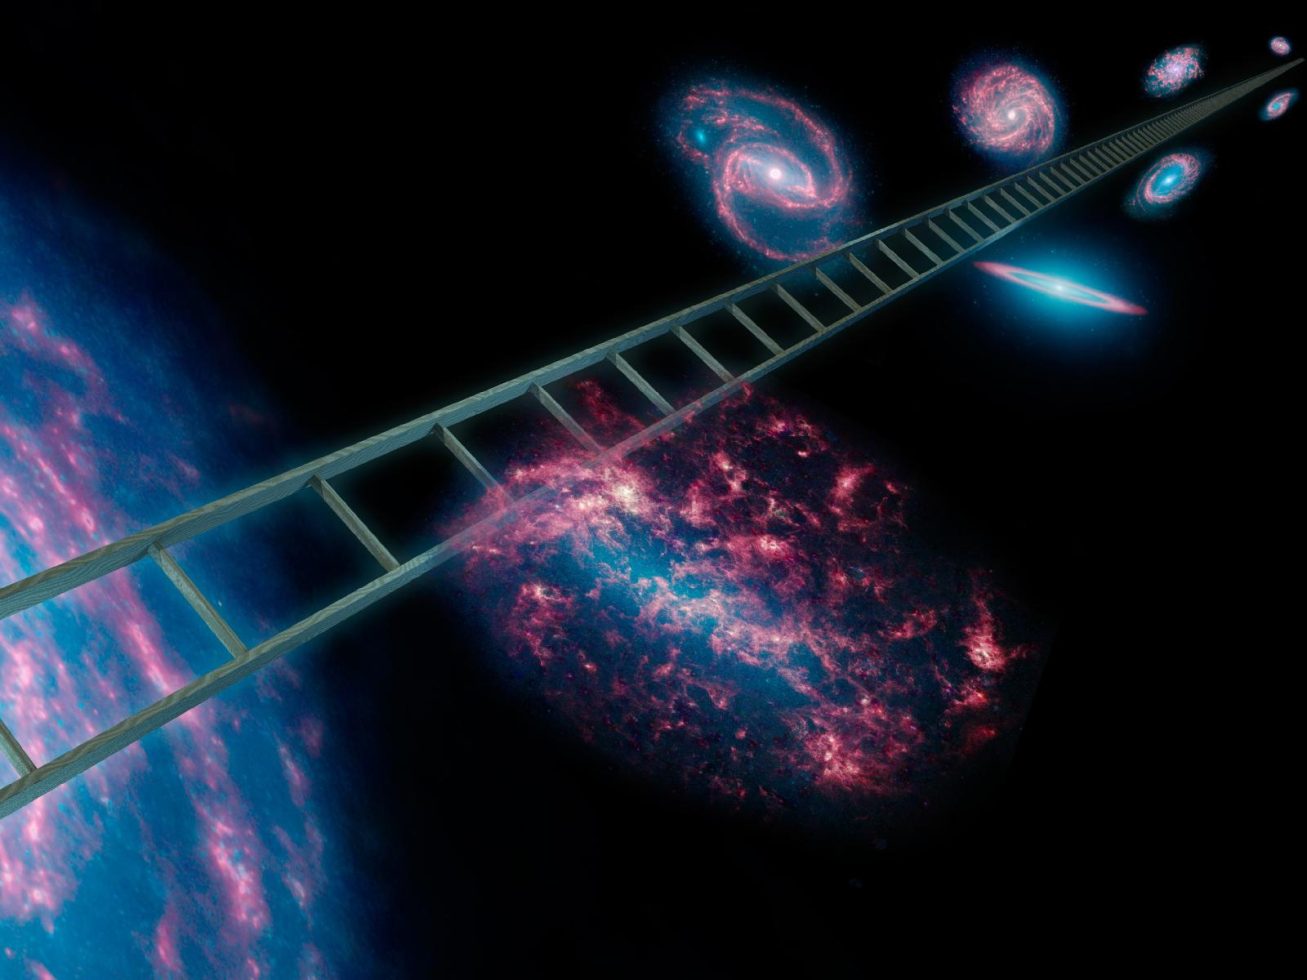 Scientists building a 300,000 km long staircase to go to the moon